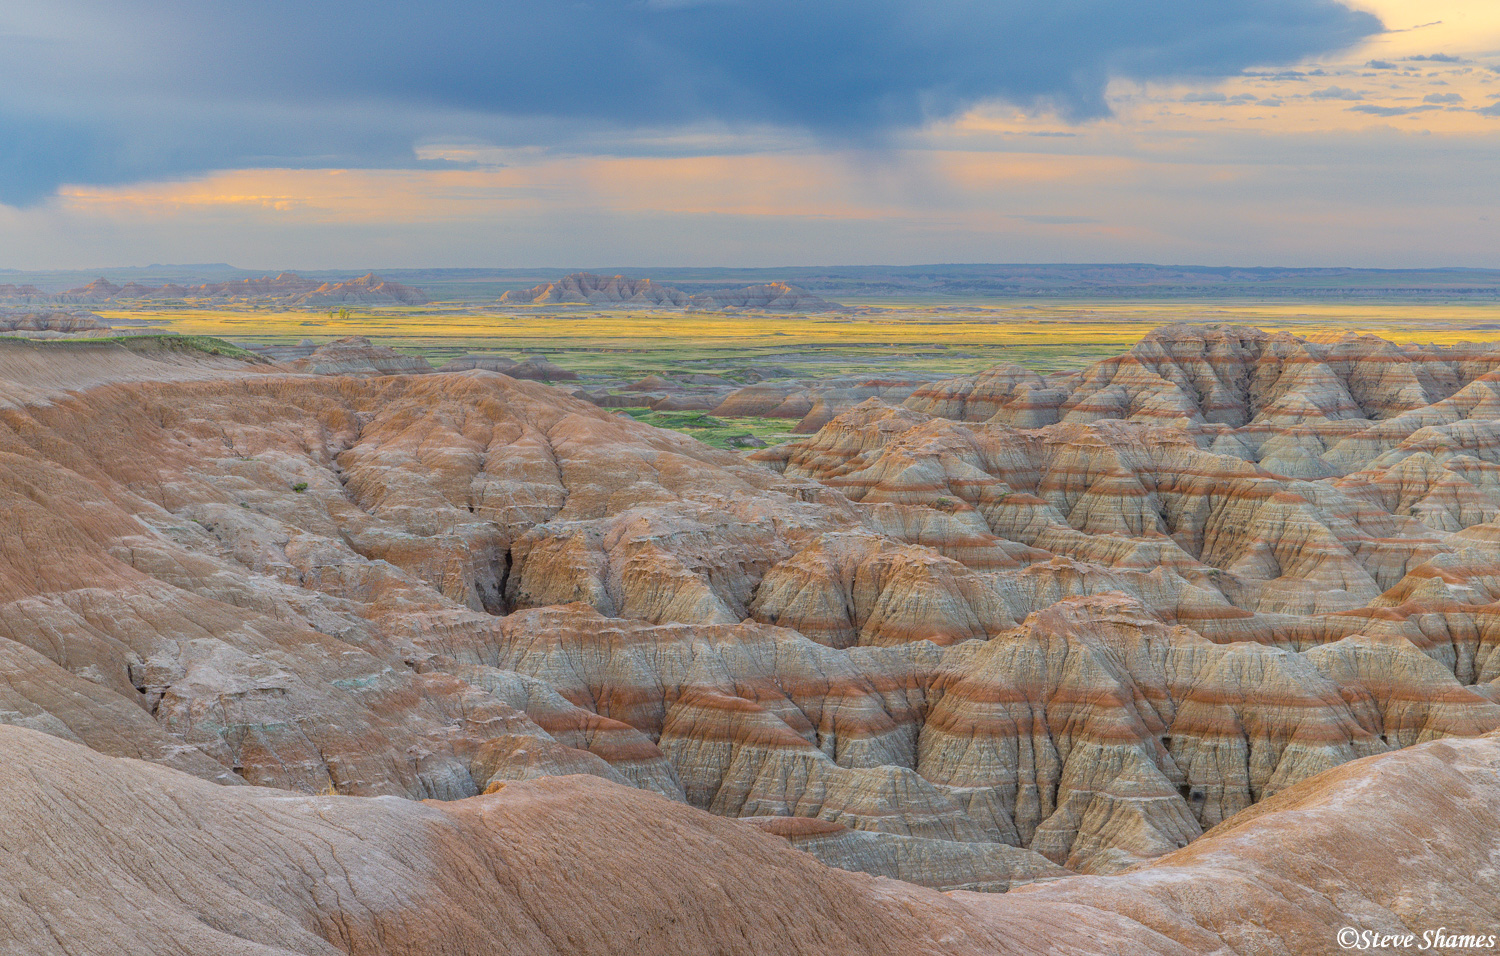 A nice mellow morning scene at a Badlands overlook